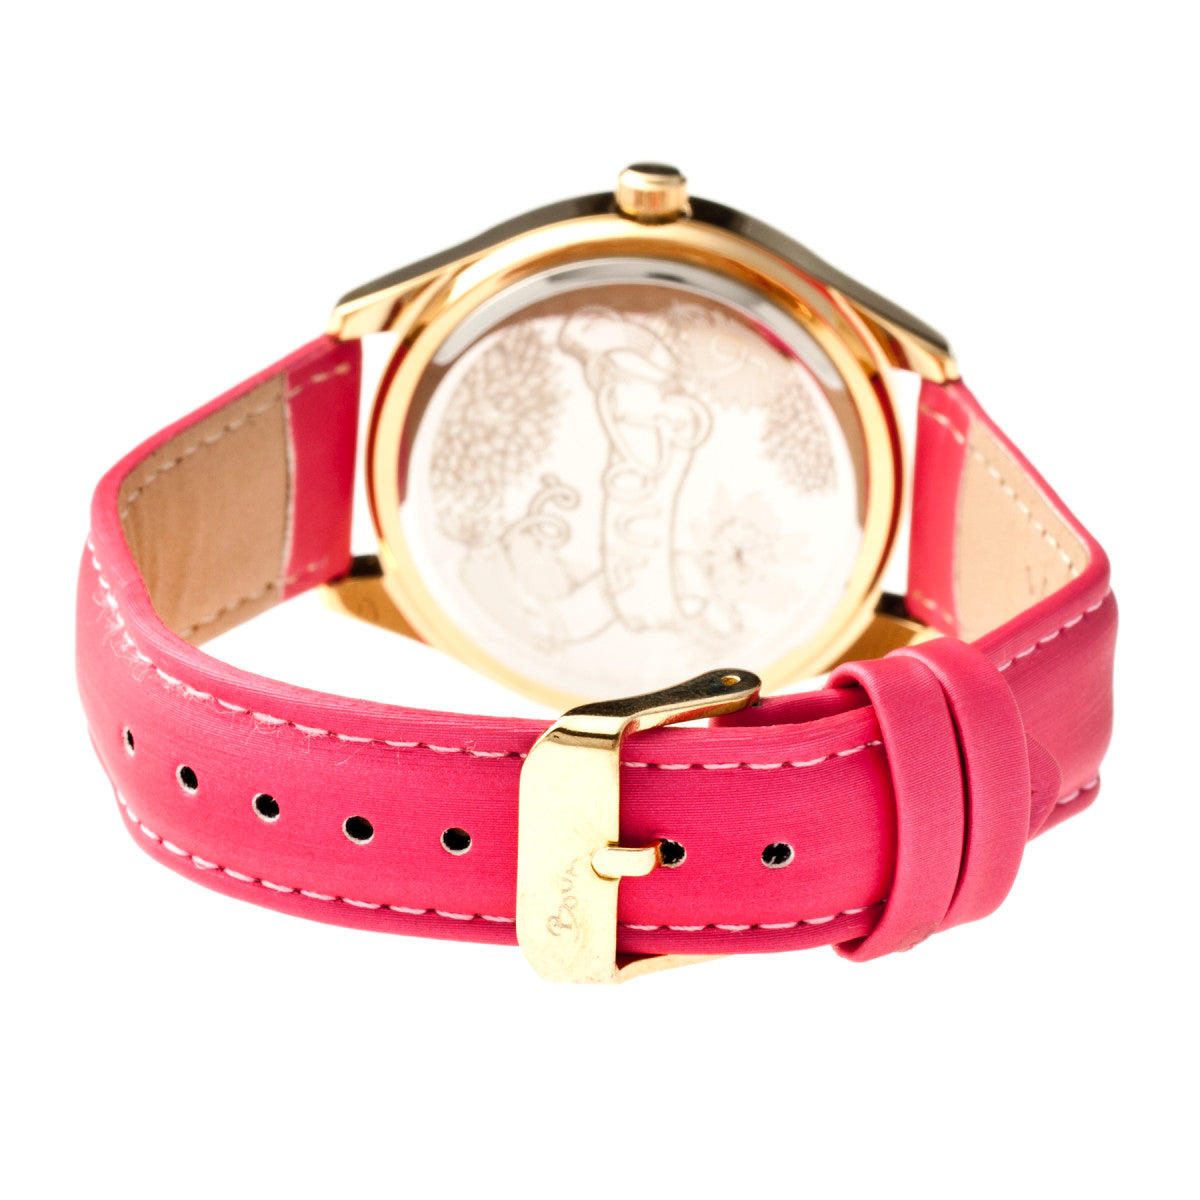 Boum Chic Mirror-Dial Leather-Band Ladies Watch - Gold/Pink - BOUBM2006